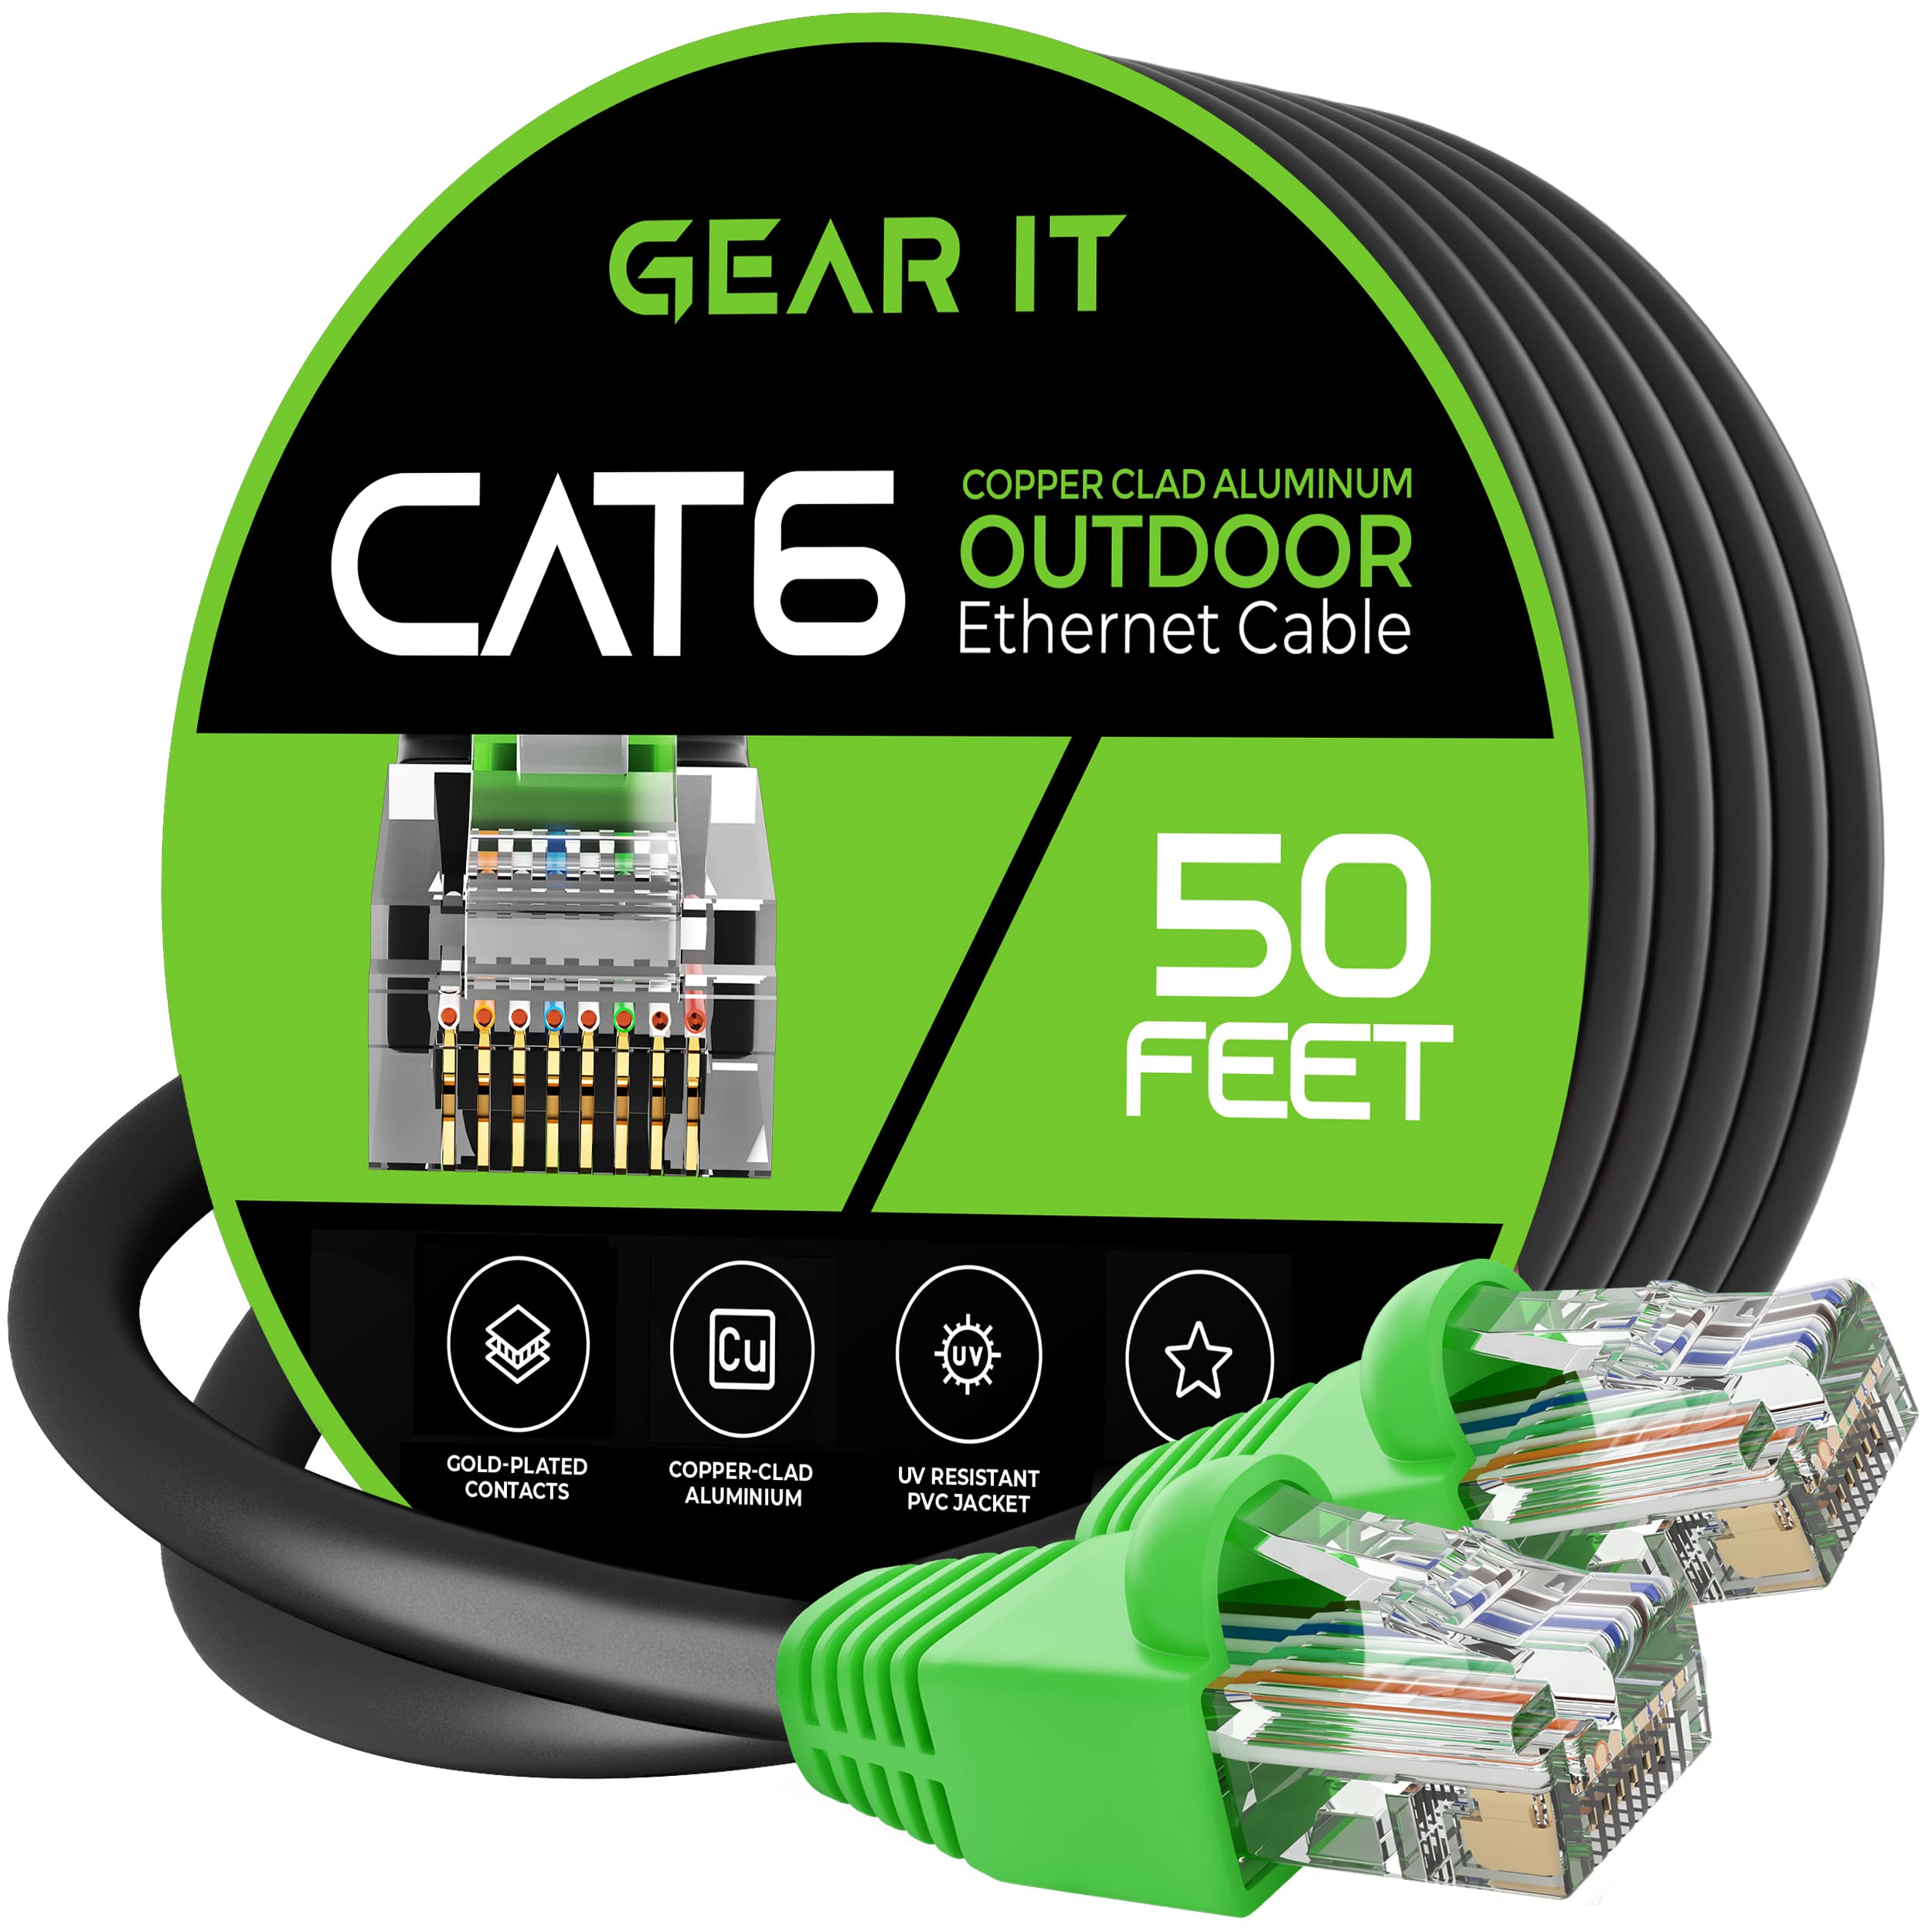 gearIT cat6 Outdoor Ethernet cable (50 Feet) ccA copper clad, Waterproof, Direct Burial, In-ground, UV Jacket, POE, Network, Int